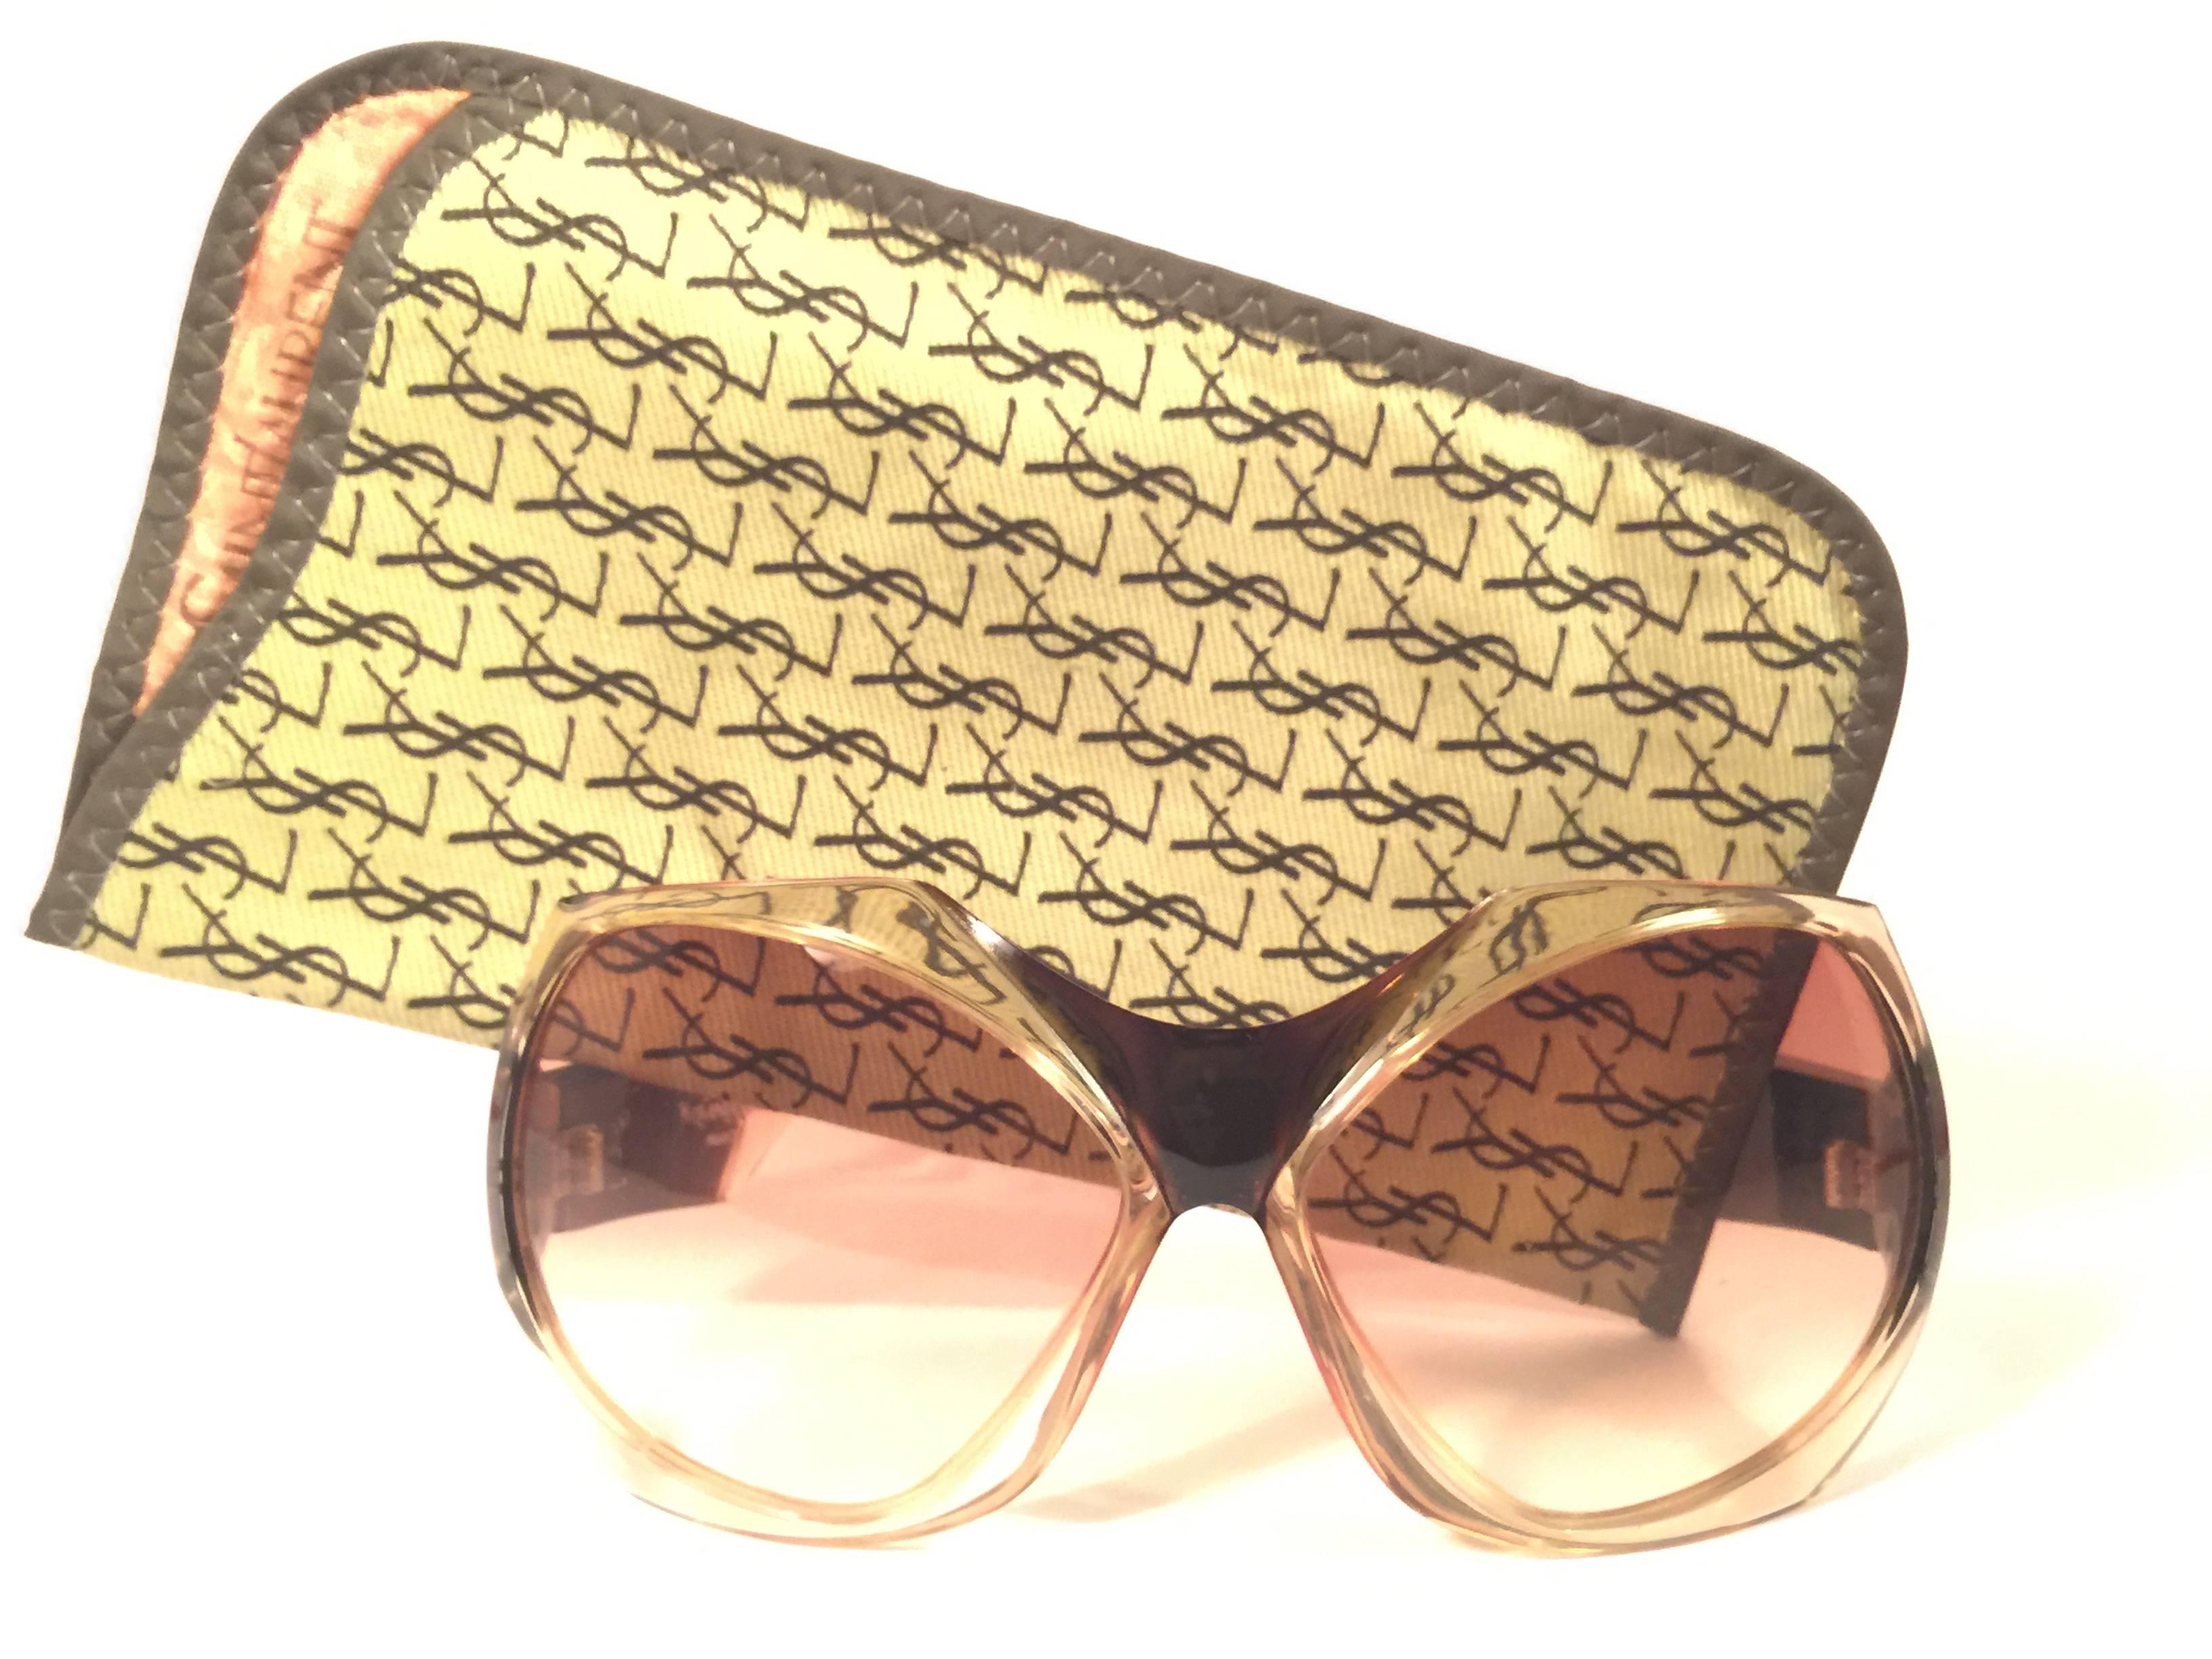 
Beautiful and stylish vintage new Yves Saint Laurent 1970’s Oversized  sunglasses in a translucent mask shaped frame. Spotless pair of light amber gradient lenses.
New! never worn or displayed. This pair has minor sign of wear due to